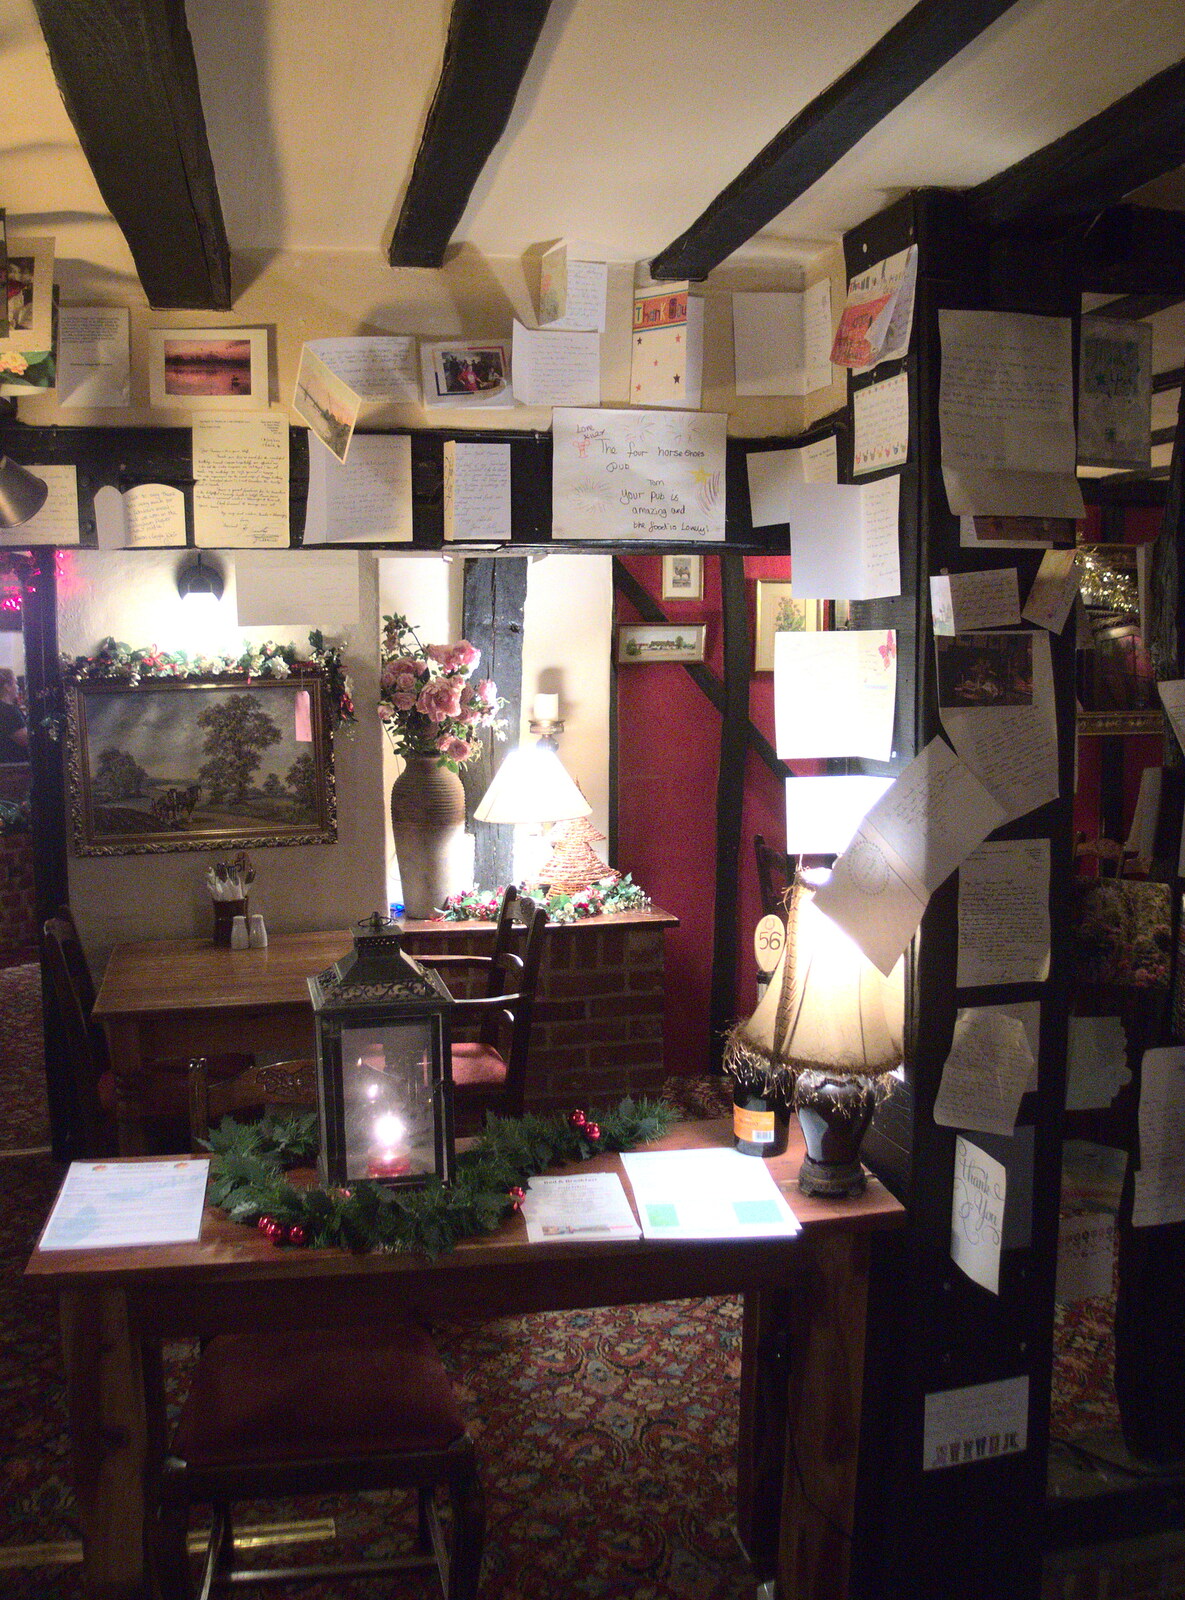 There are loads of cards on the wall from A Pub Crawl and Christmas Lights, Thornham, Cotton, Bacton and Eye, Suffolk - 7th December 2018